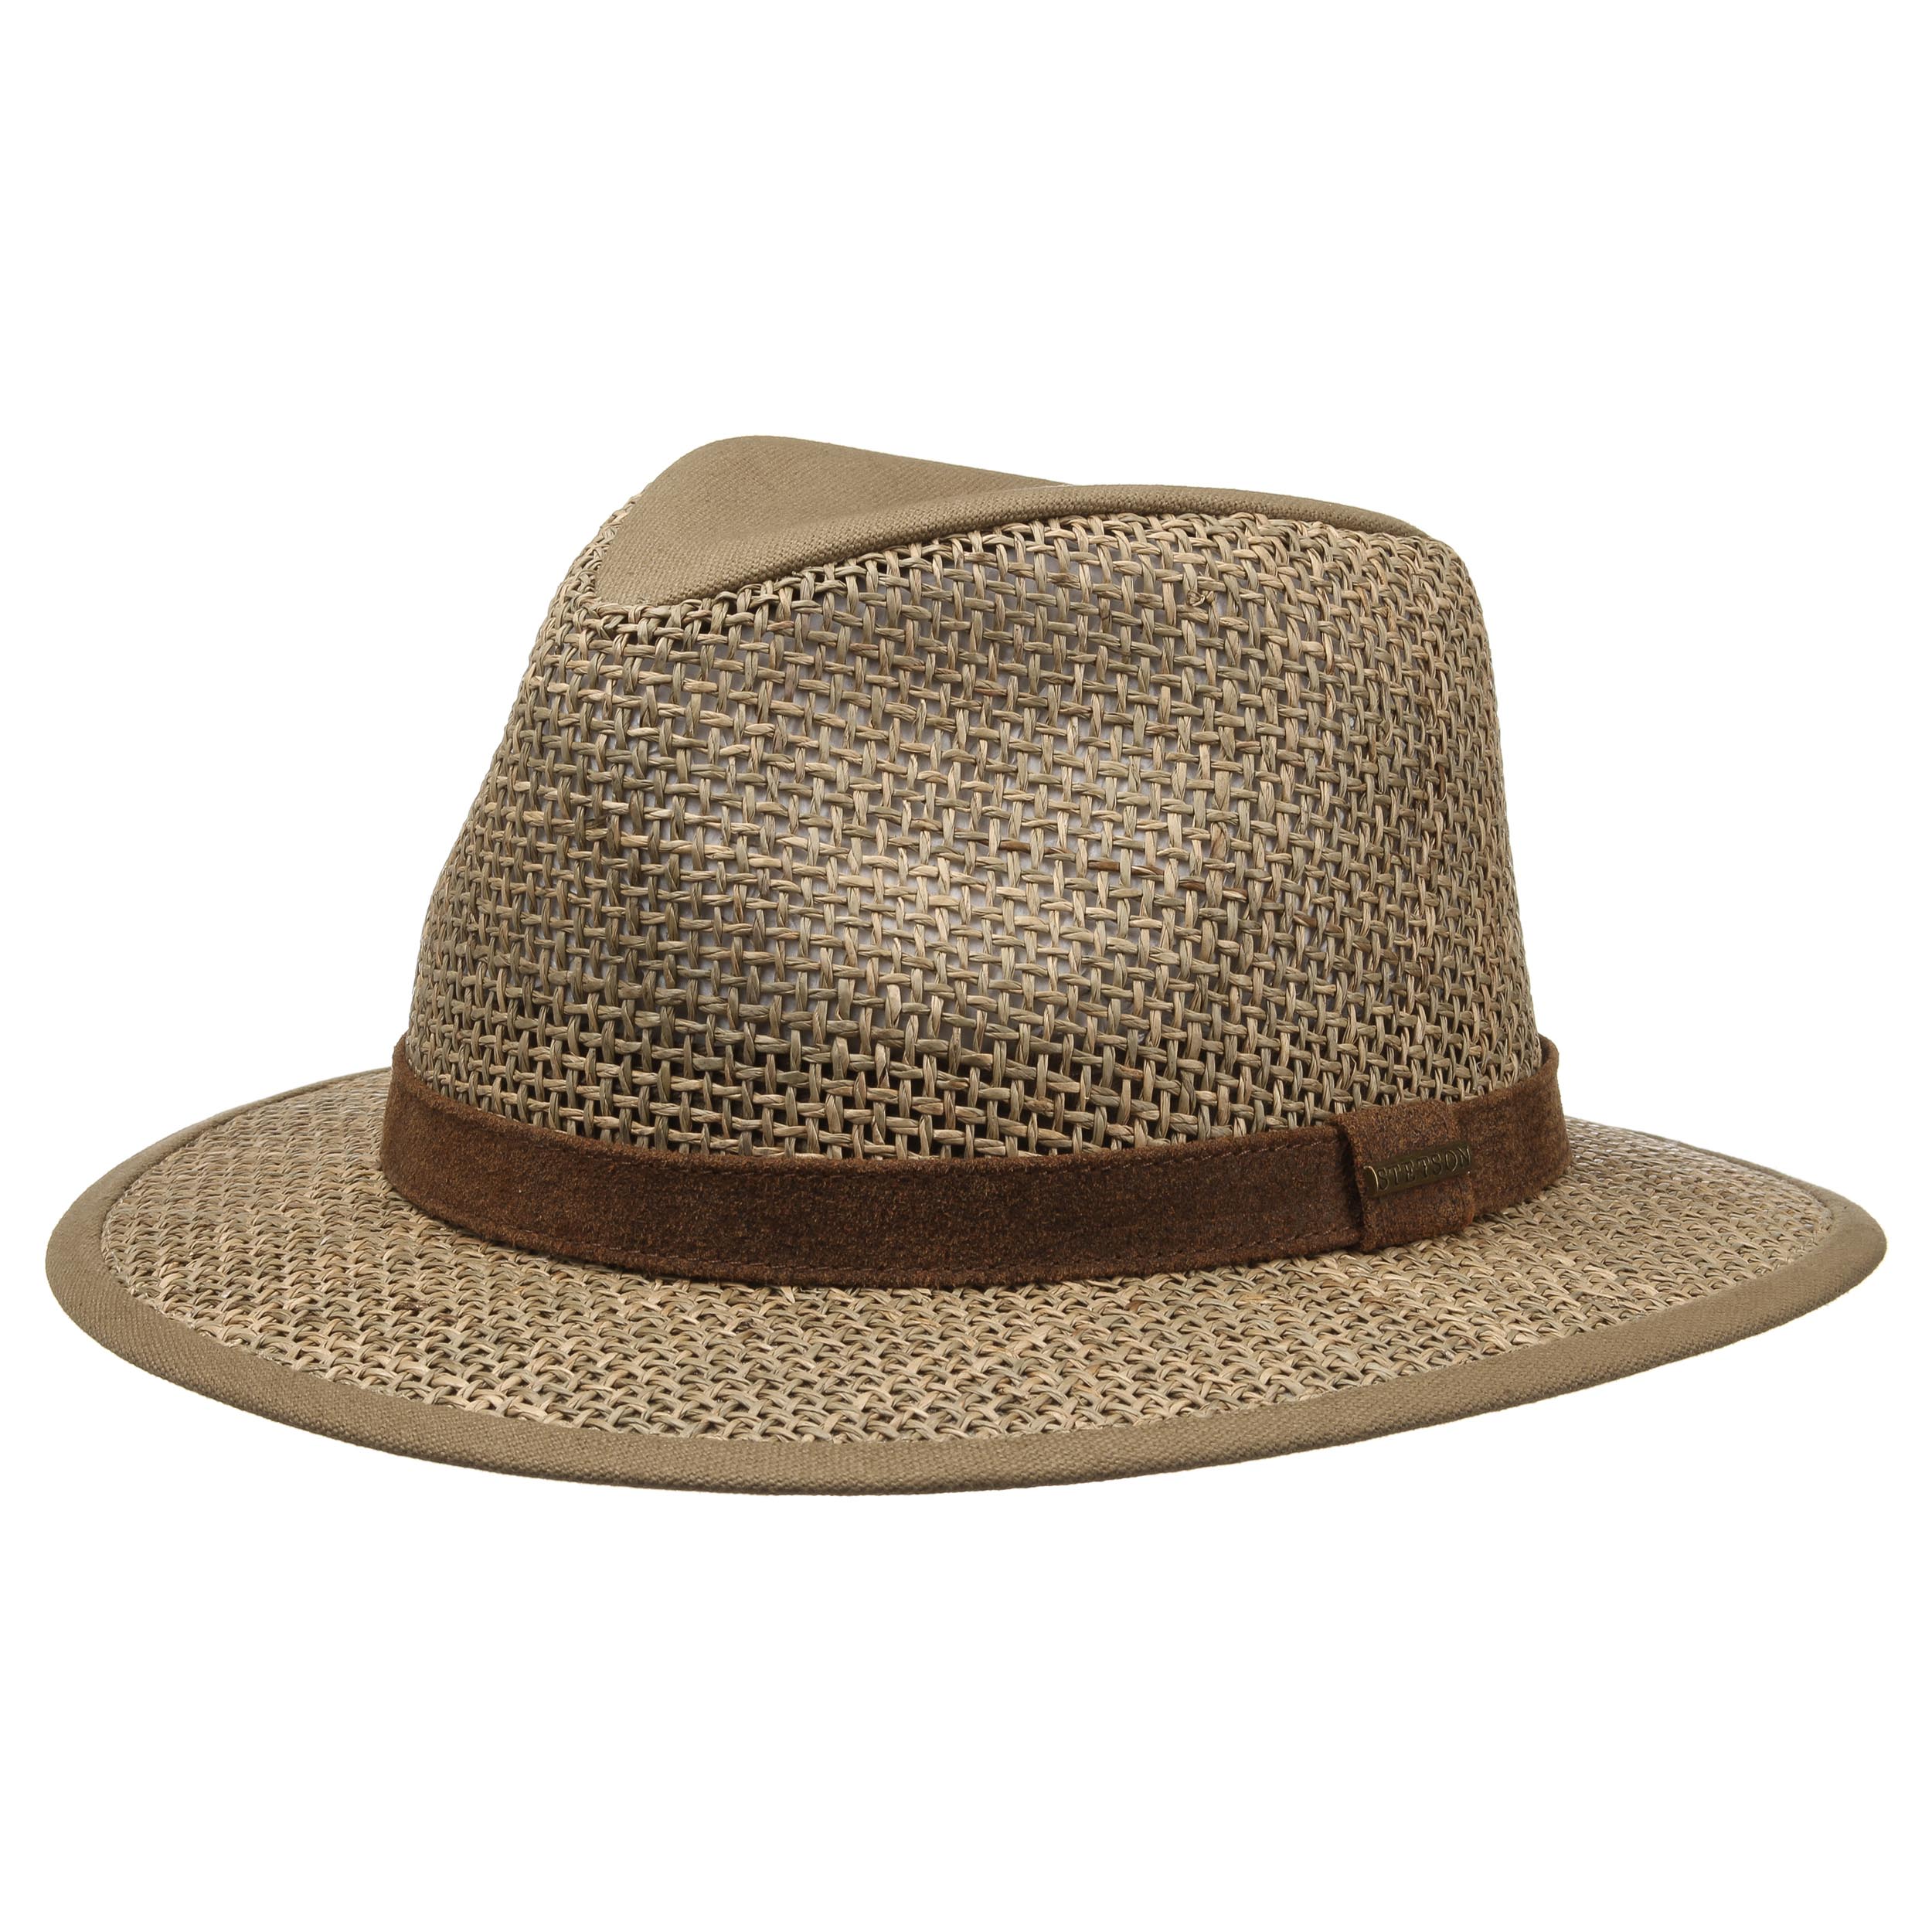 Medfield Seagrass Summer Hat by Stetson, EUR 79,00 --> Hats, caps ...